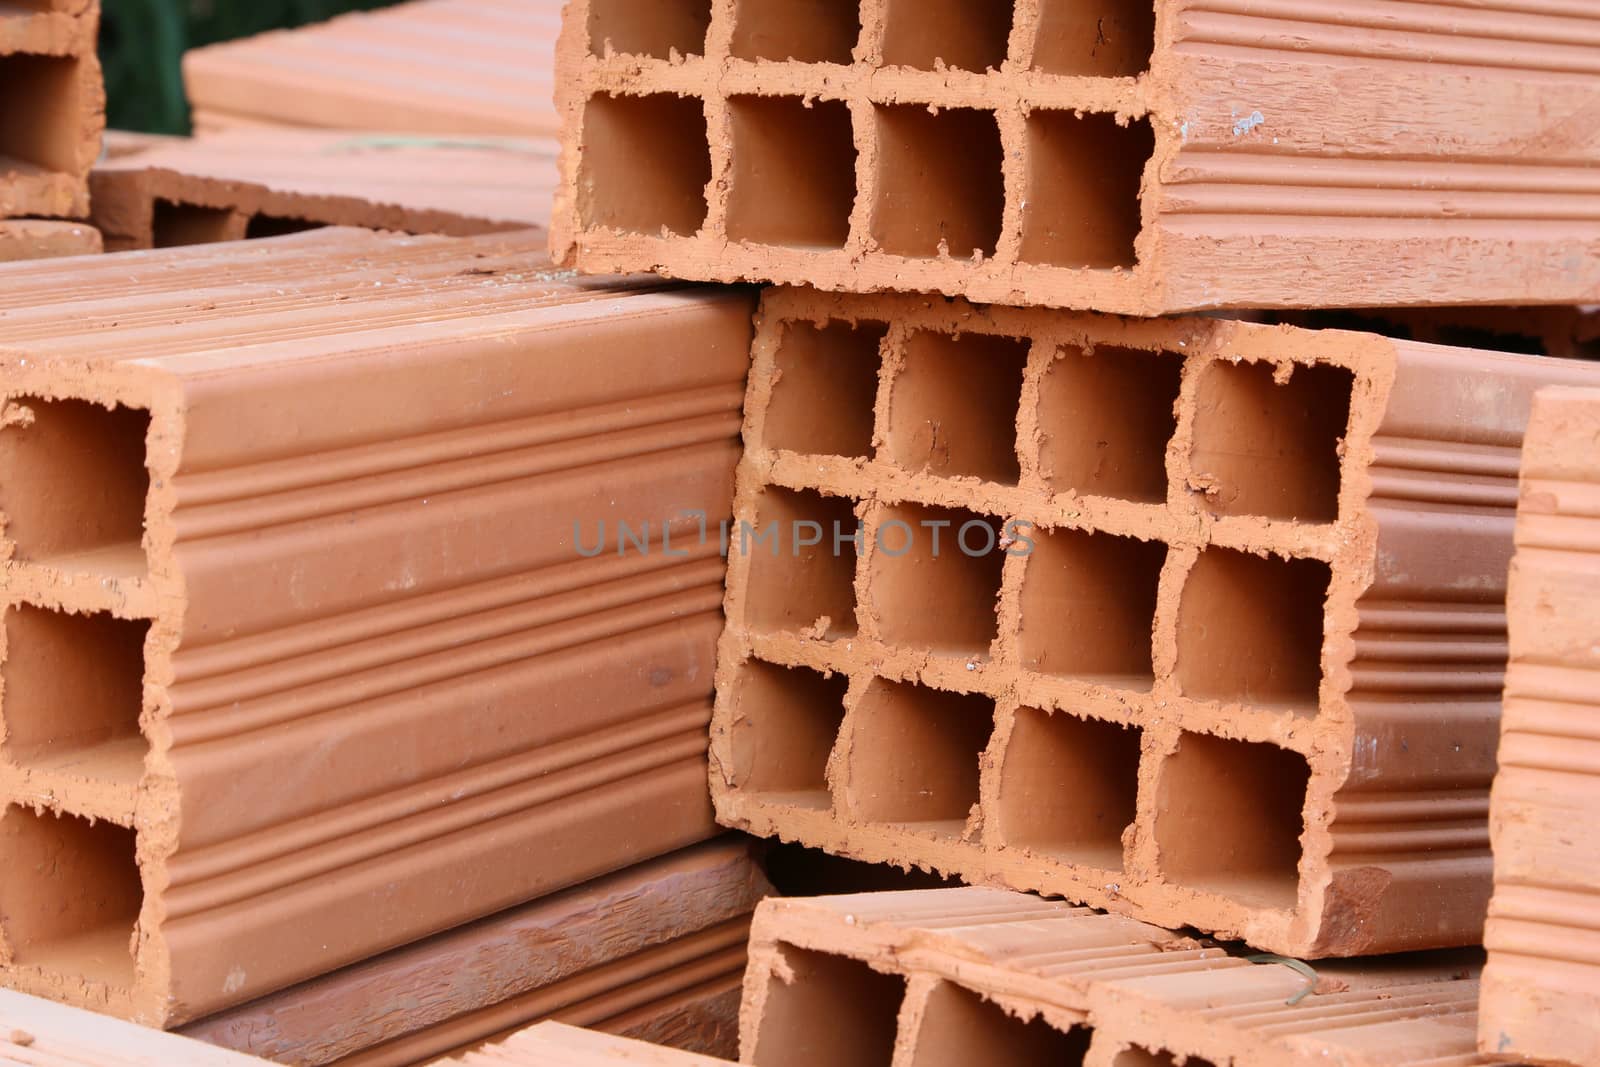 A certain number of red hollow clay bricks